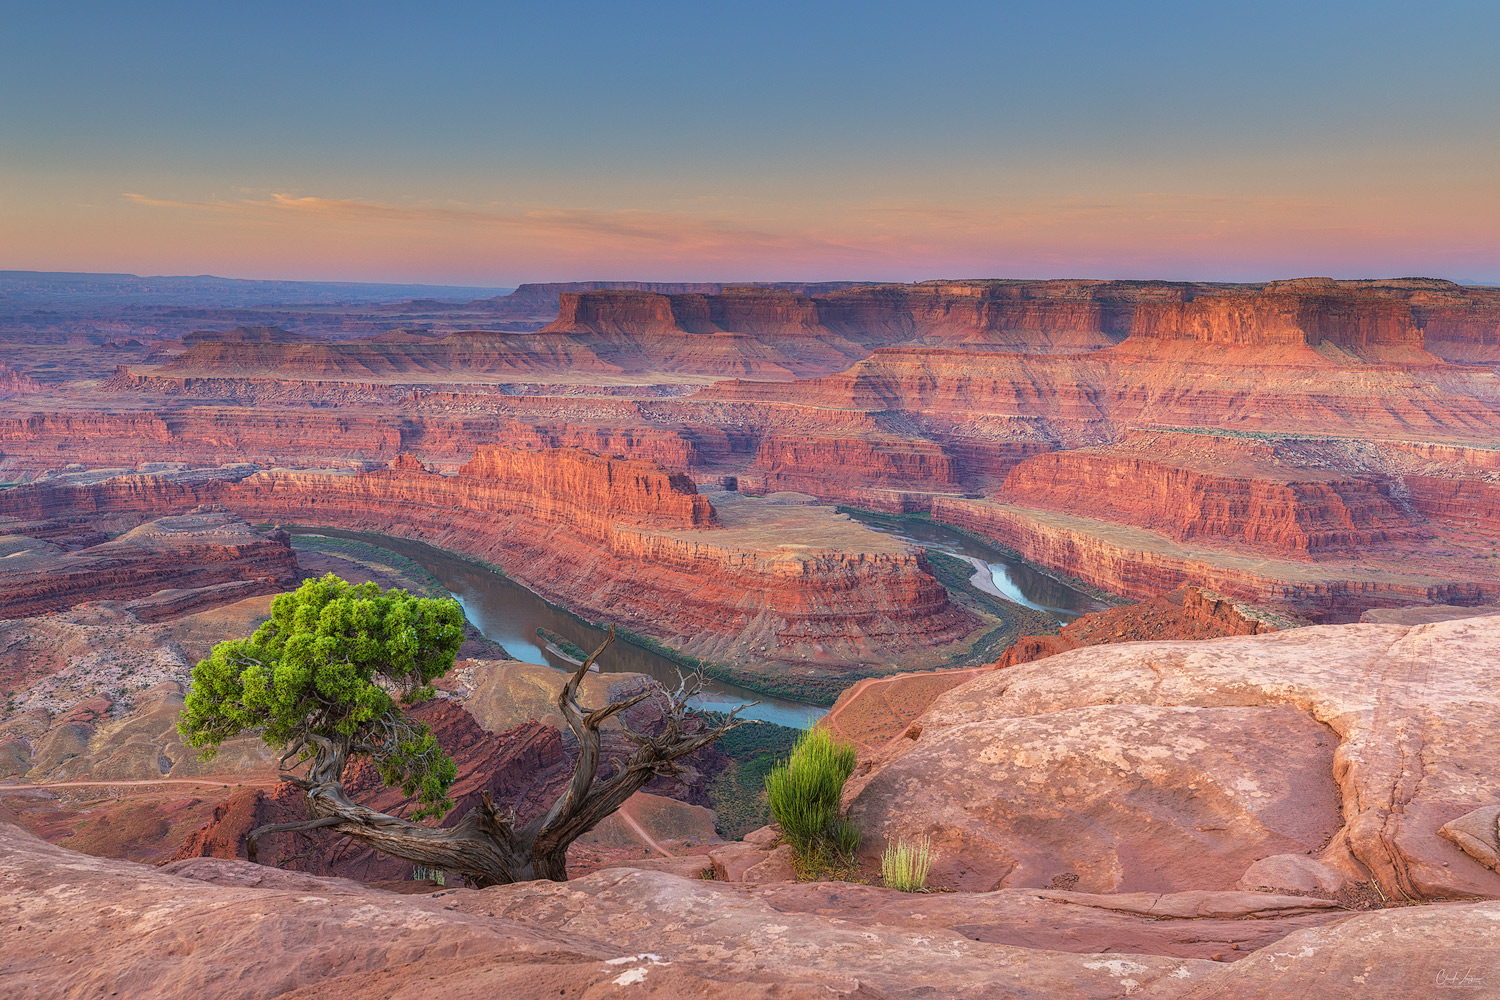 View on the Canyonlands and Colorado River from Dead Horse Point State Park in Utah.